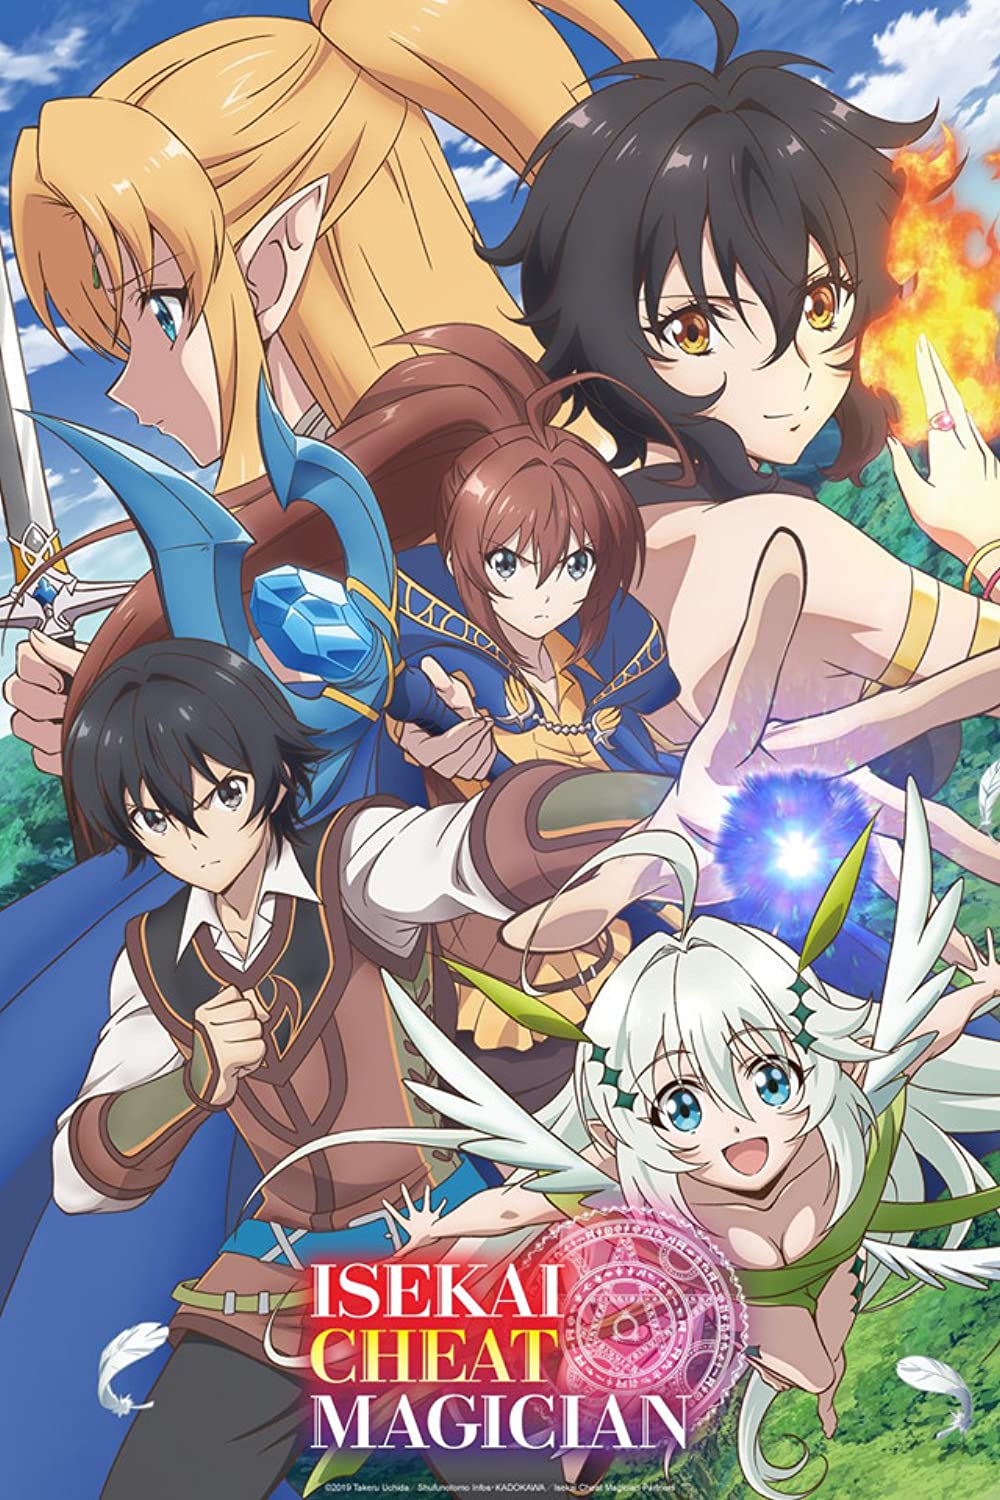 Top 10 Isekai Anime Series You Should Watch Right Now - Anime Galaxy